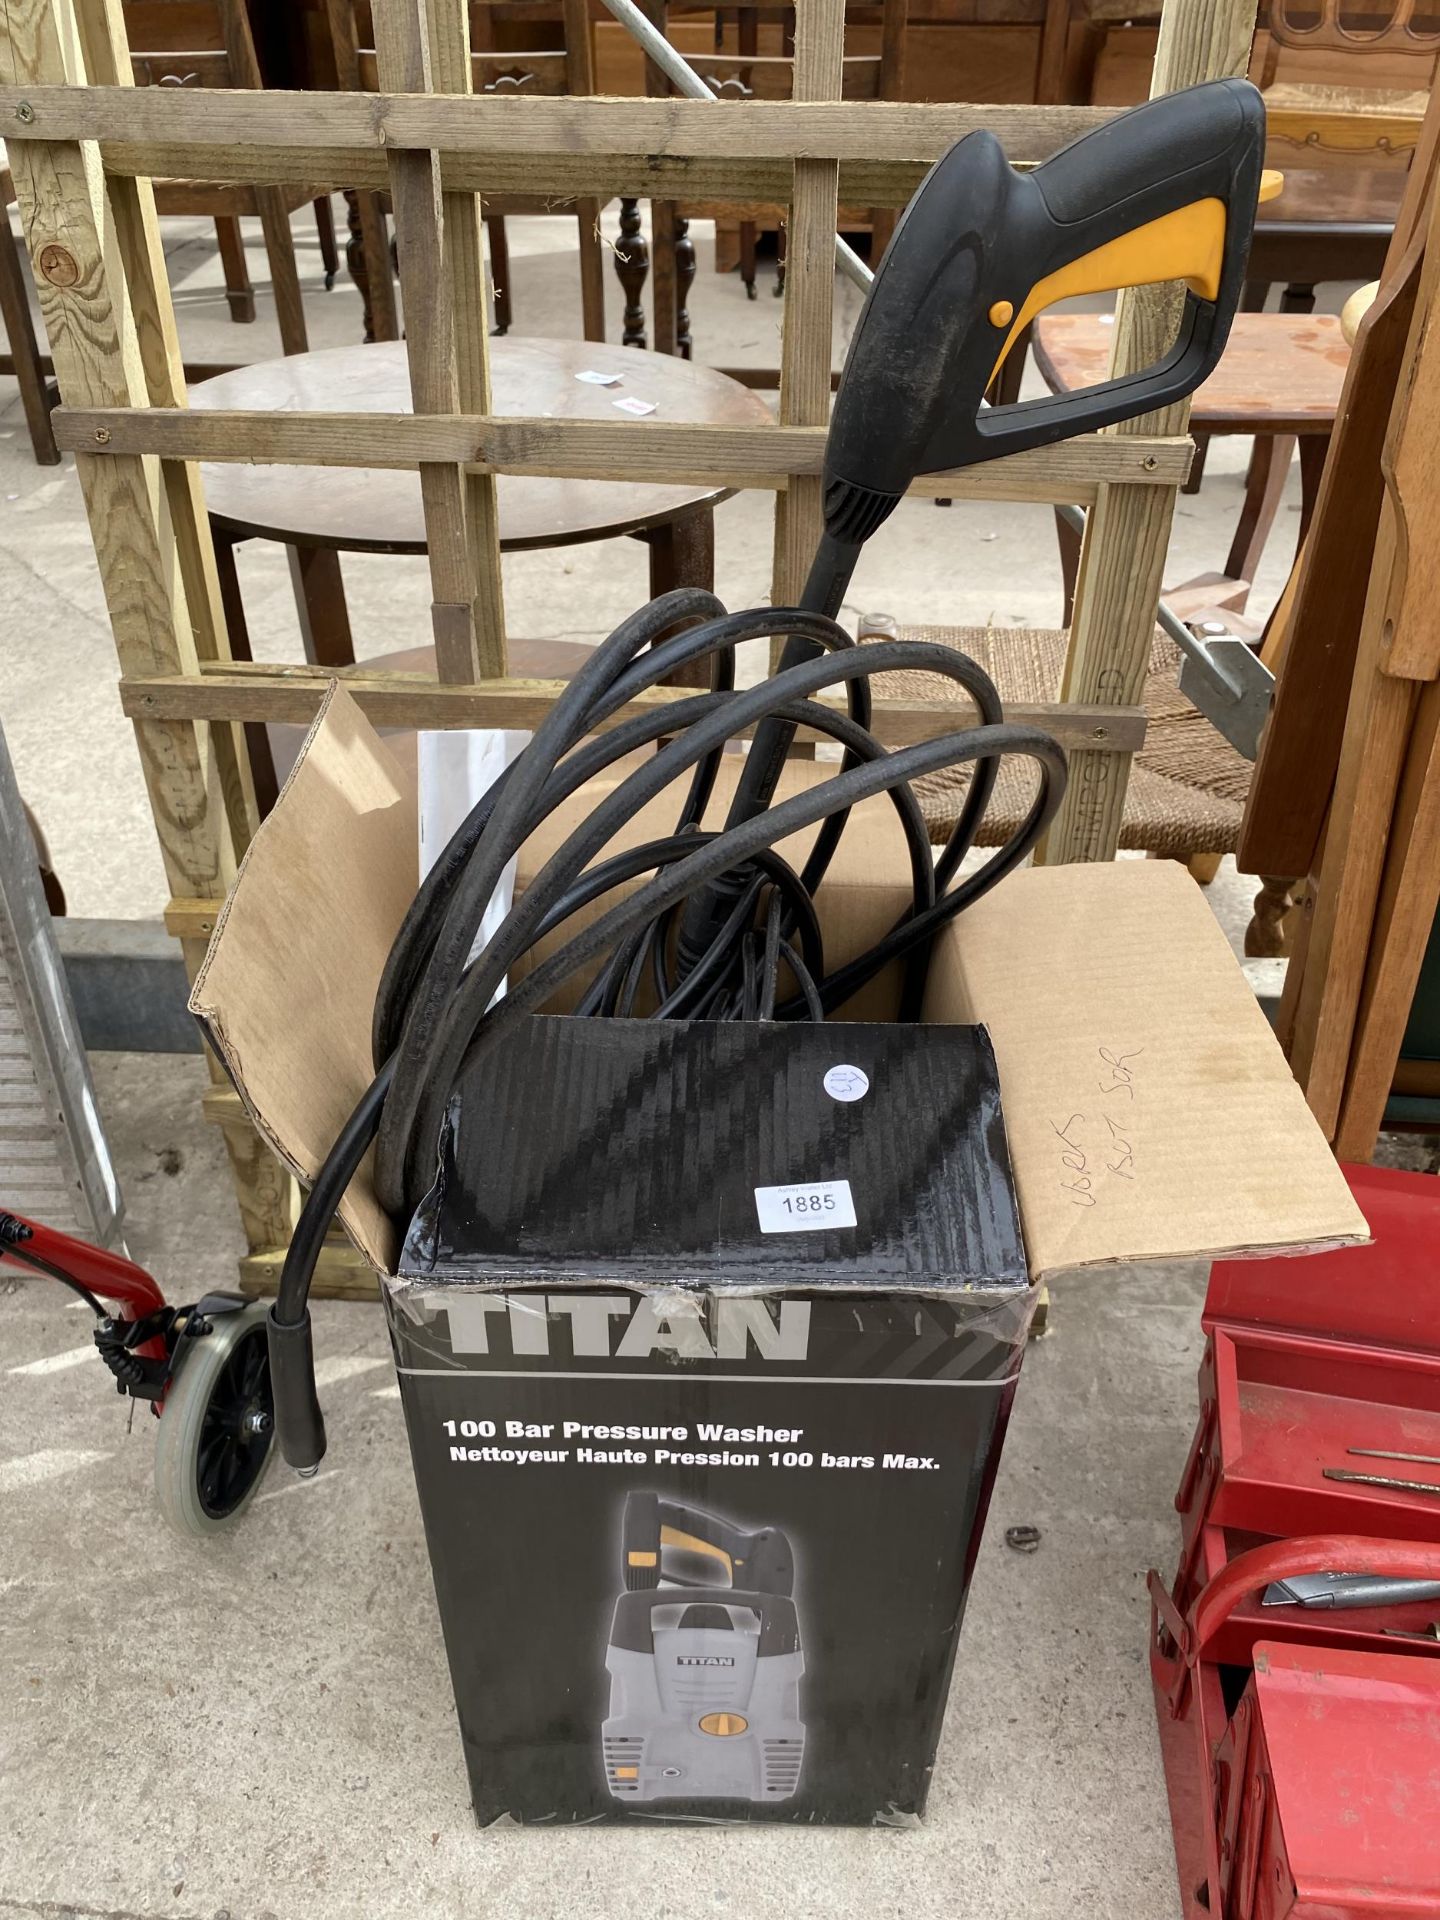 A TITAN ELECTRIC PRESSURE WASHER FOR SPARES AND REPAIRS